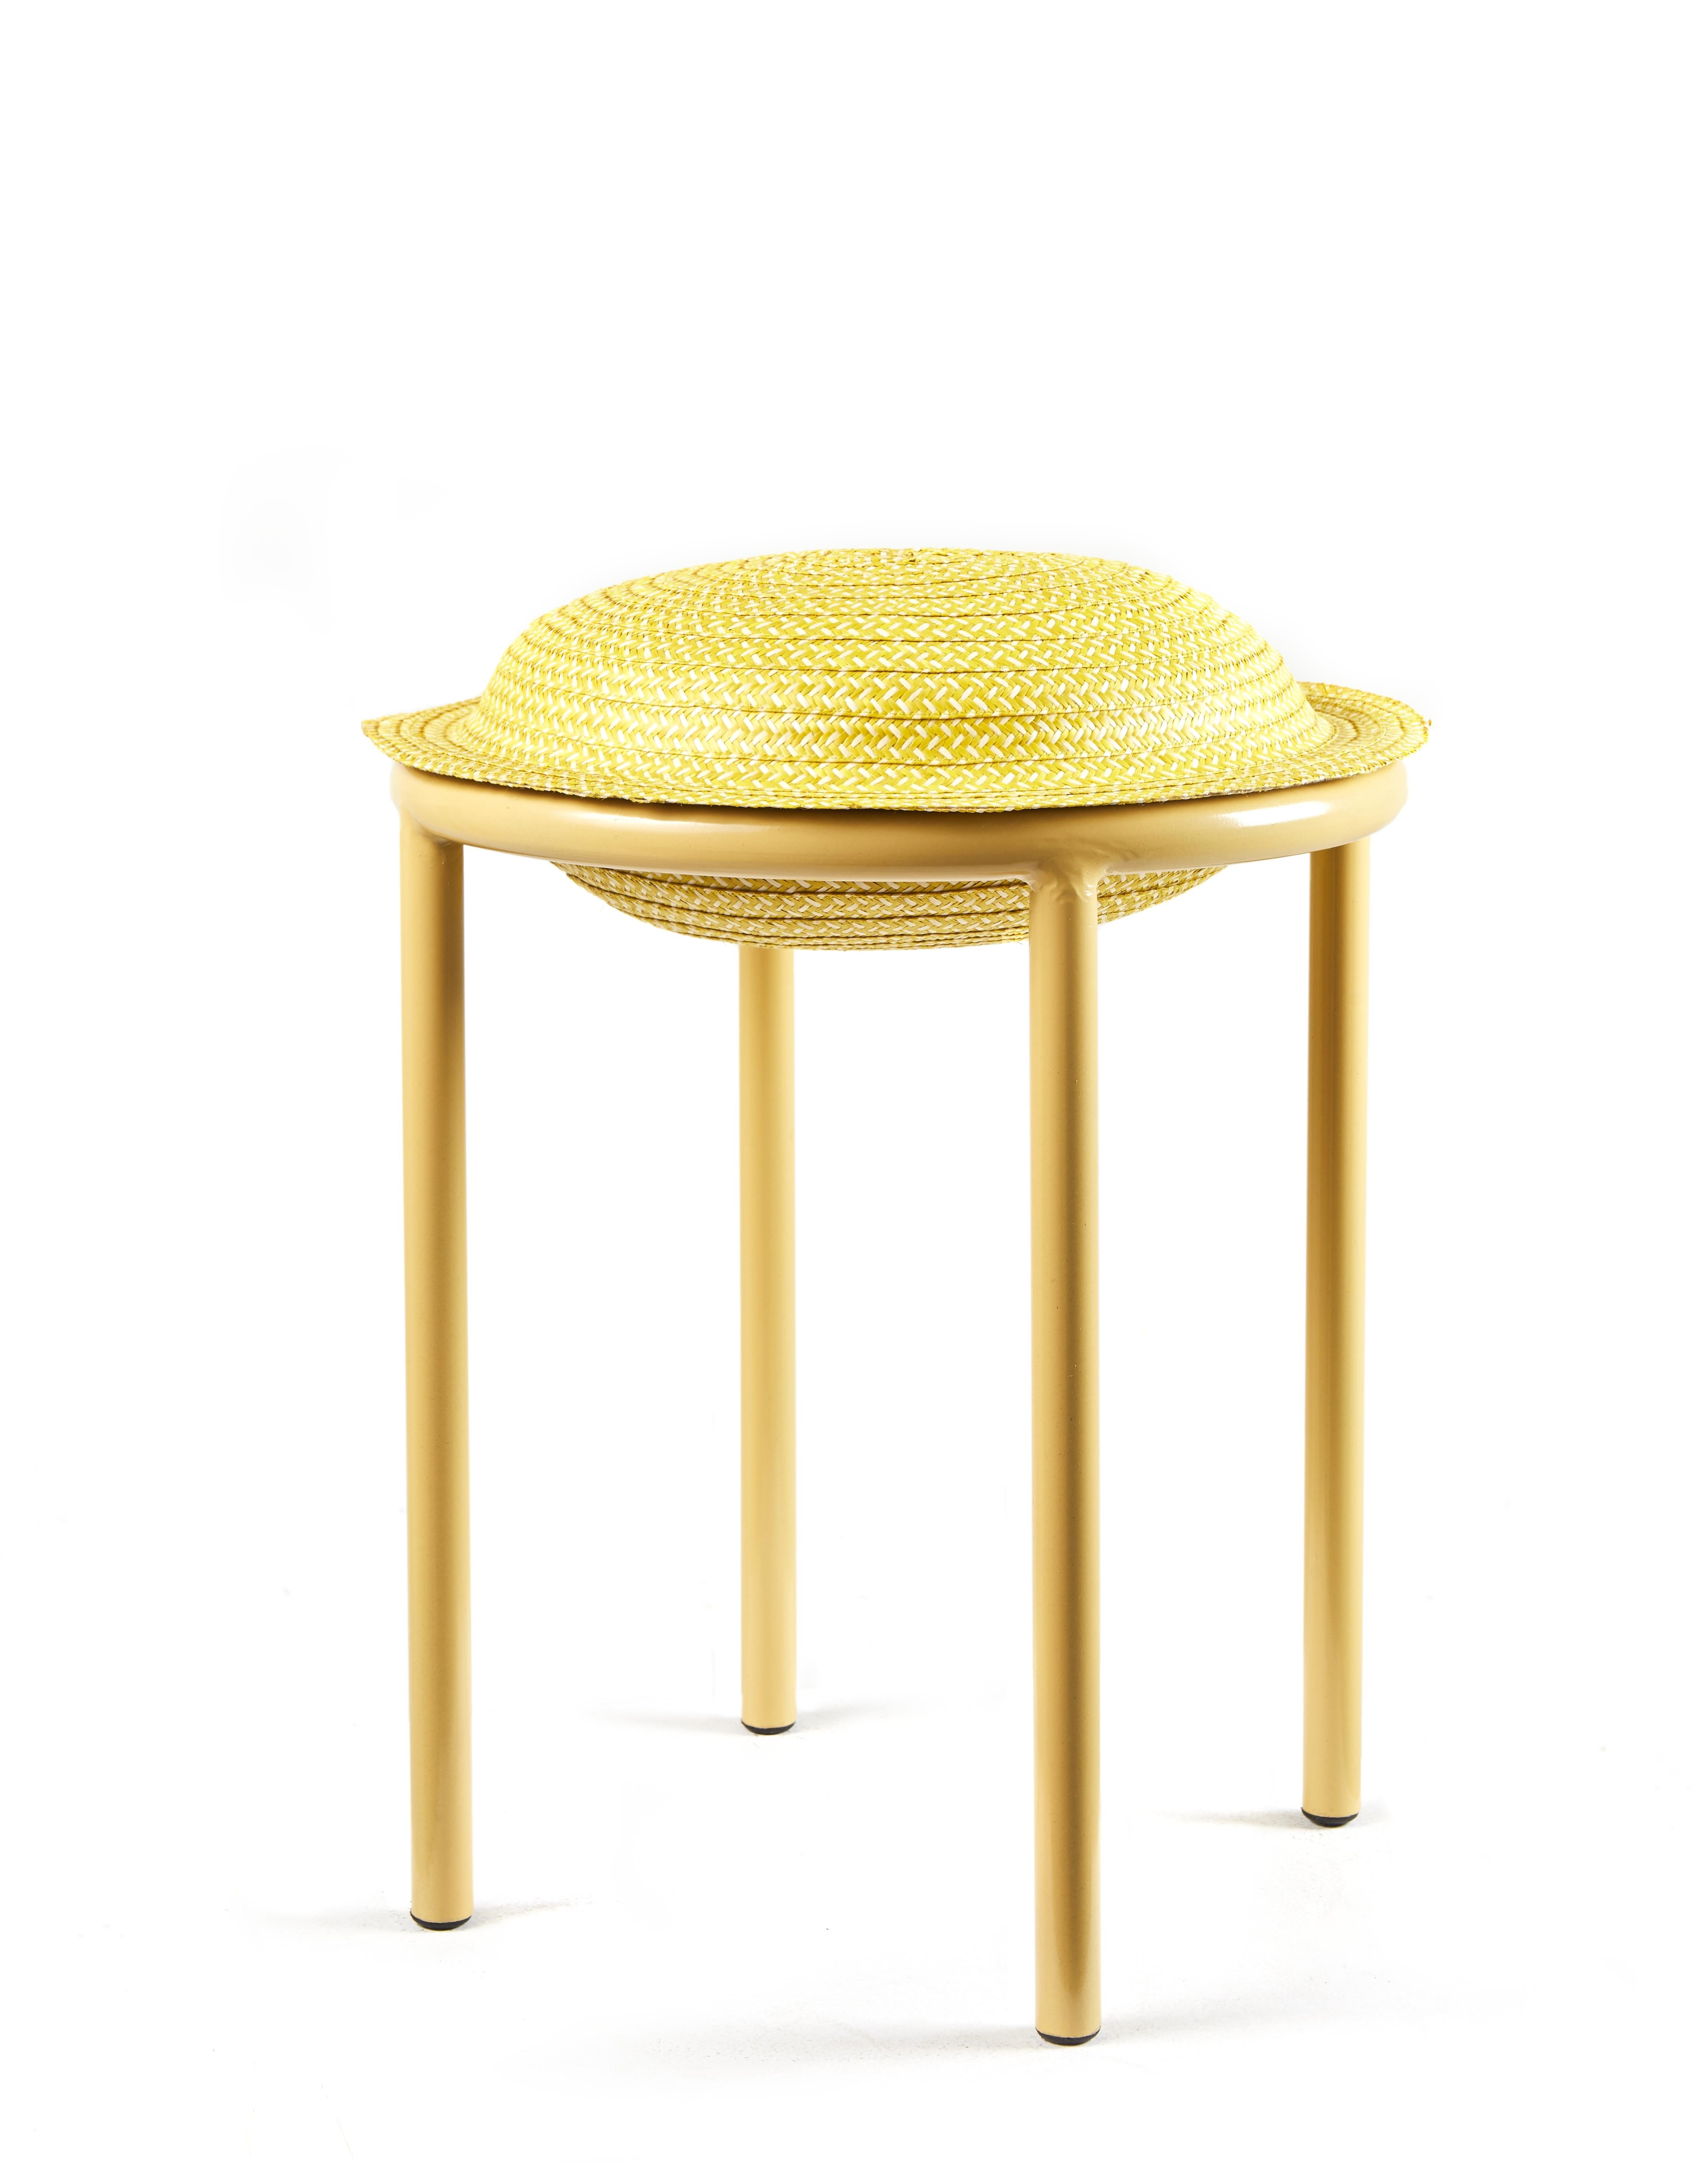 Set of 2 Yellow Cana stool by Pauline Deltour by Cristina Celestino
Materials: Galvanized and powder-coated tubular steel. Caña Flecha.
Technique: Hand-woven with natural fibers in Colombia. Natural dyed. 
Dimensions: Diameter 40.2 x height 48.1